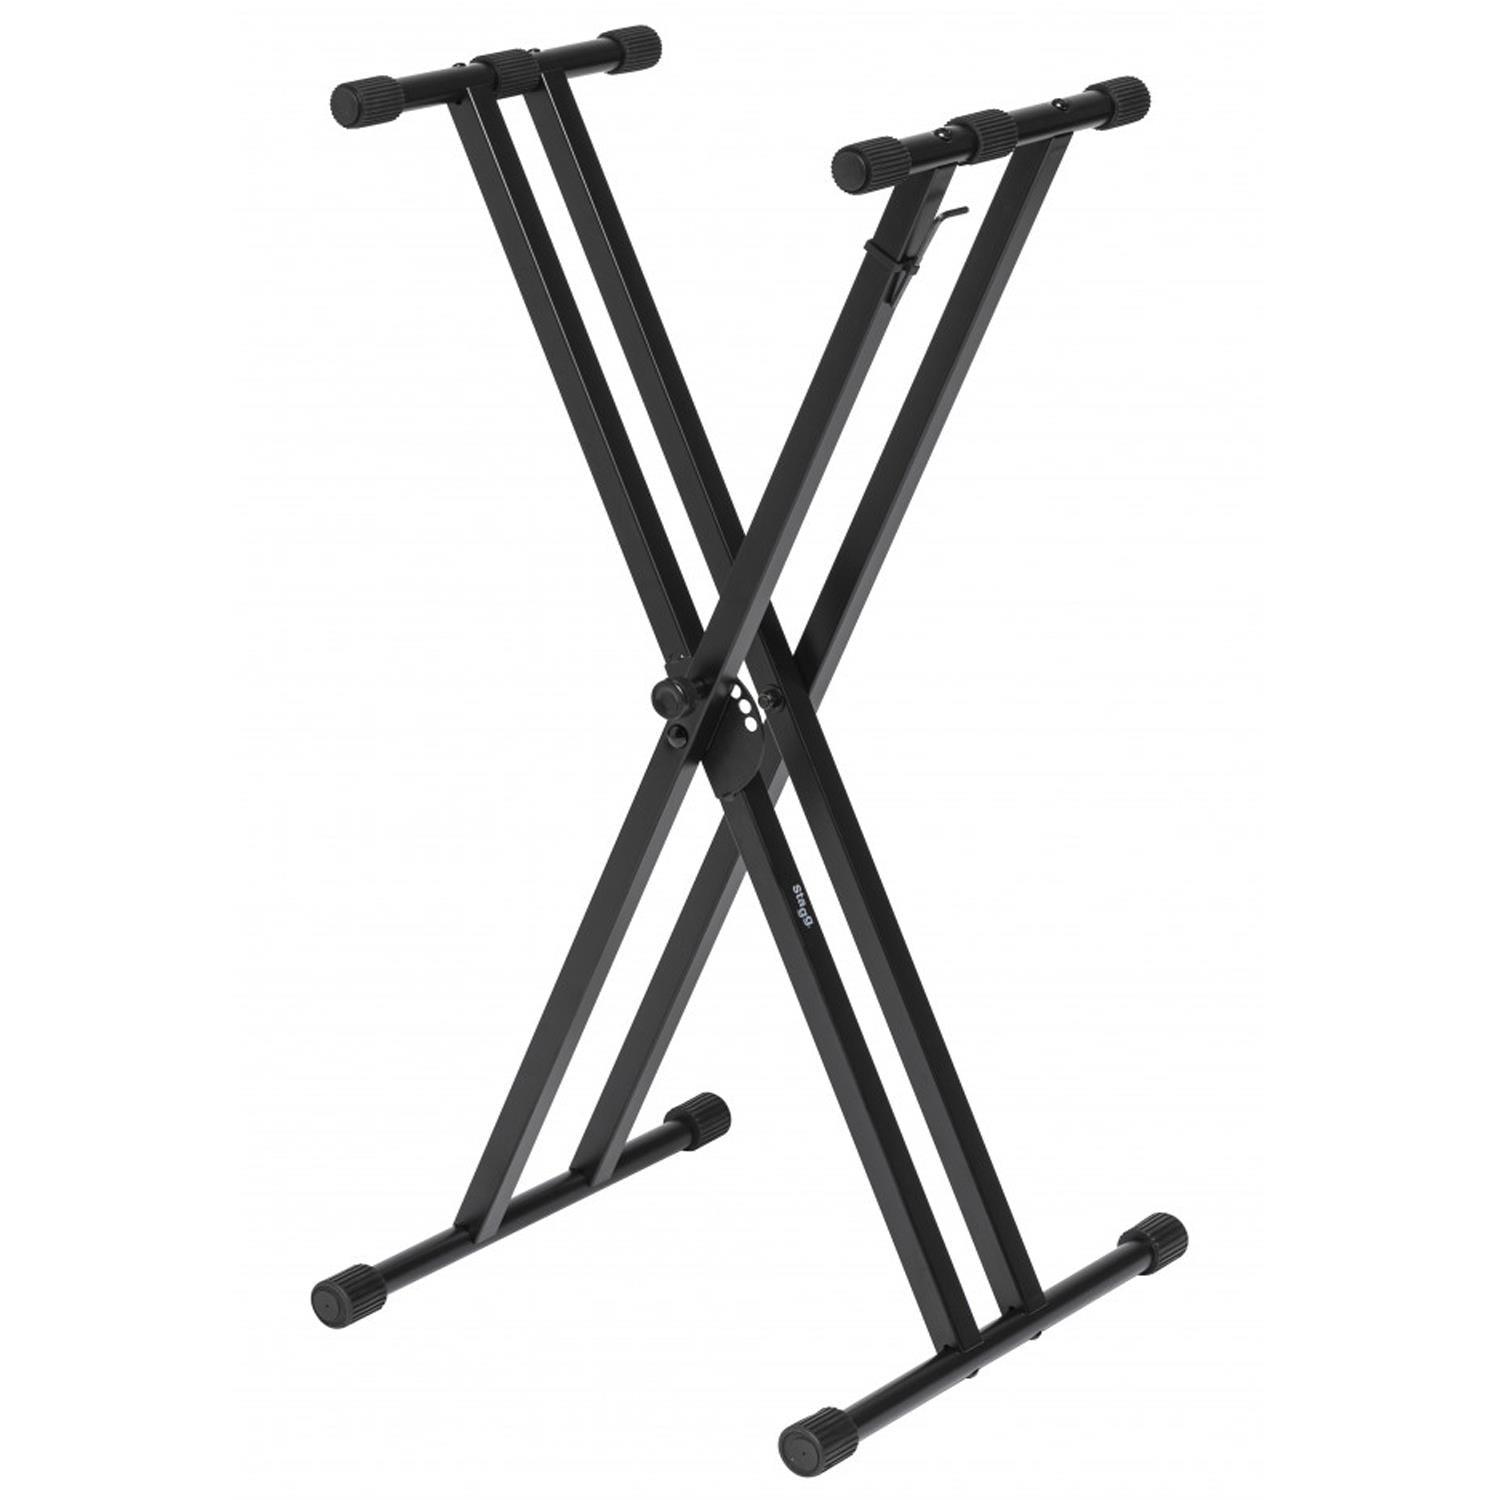 Stagg KXSQ5 Double Braced X-style Keyboard Stand - DY Pro Audio